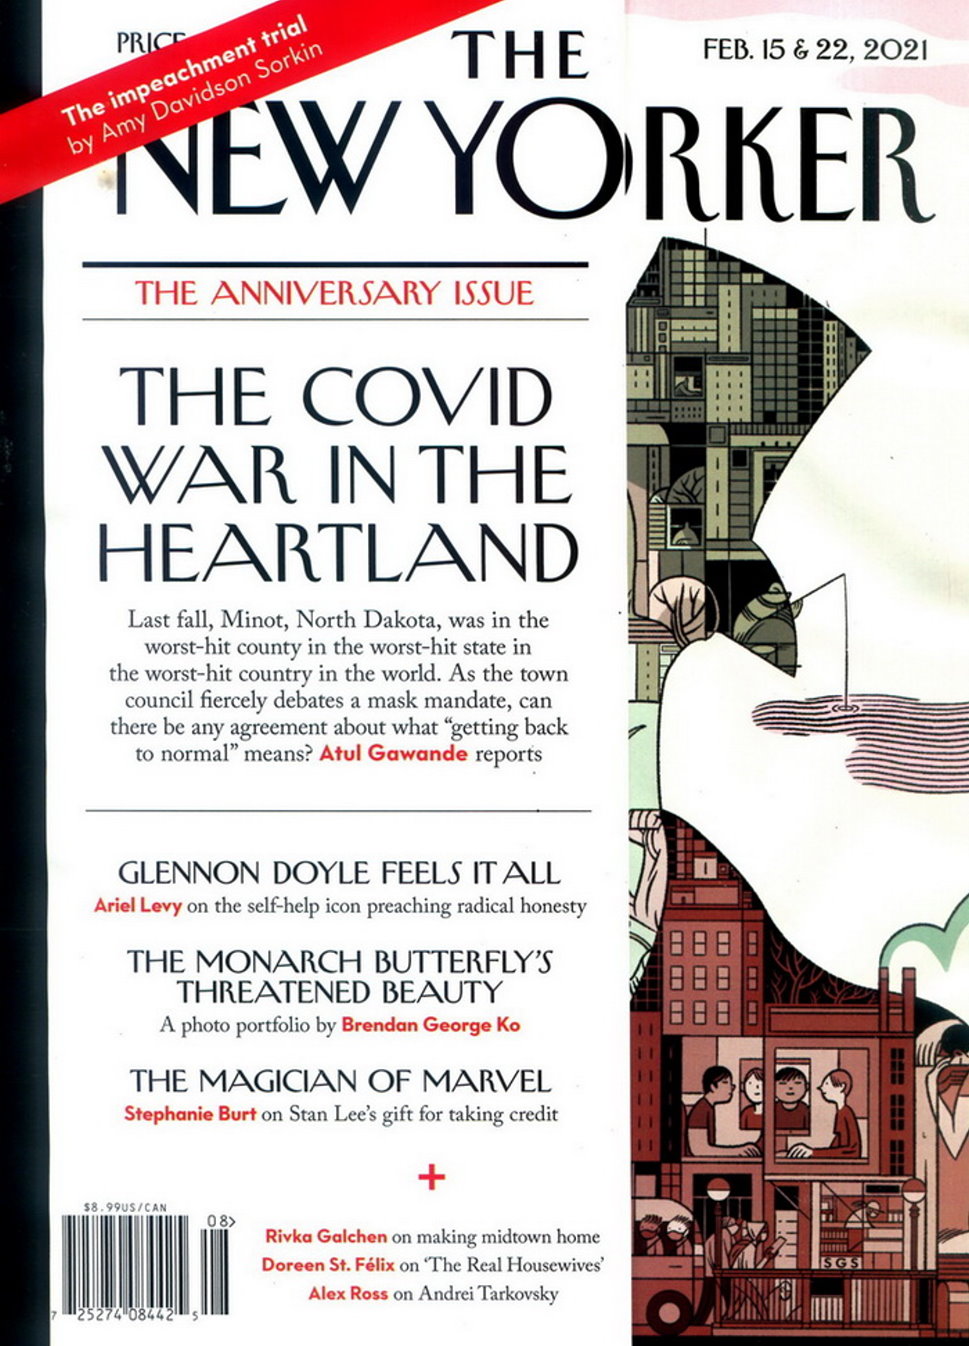 THE NEW YORKER 2月15-22日/2021